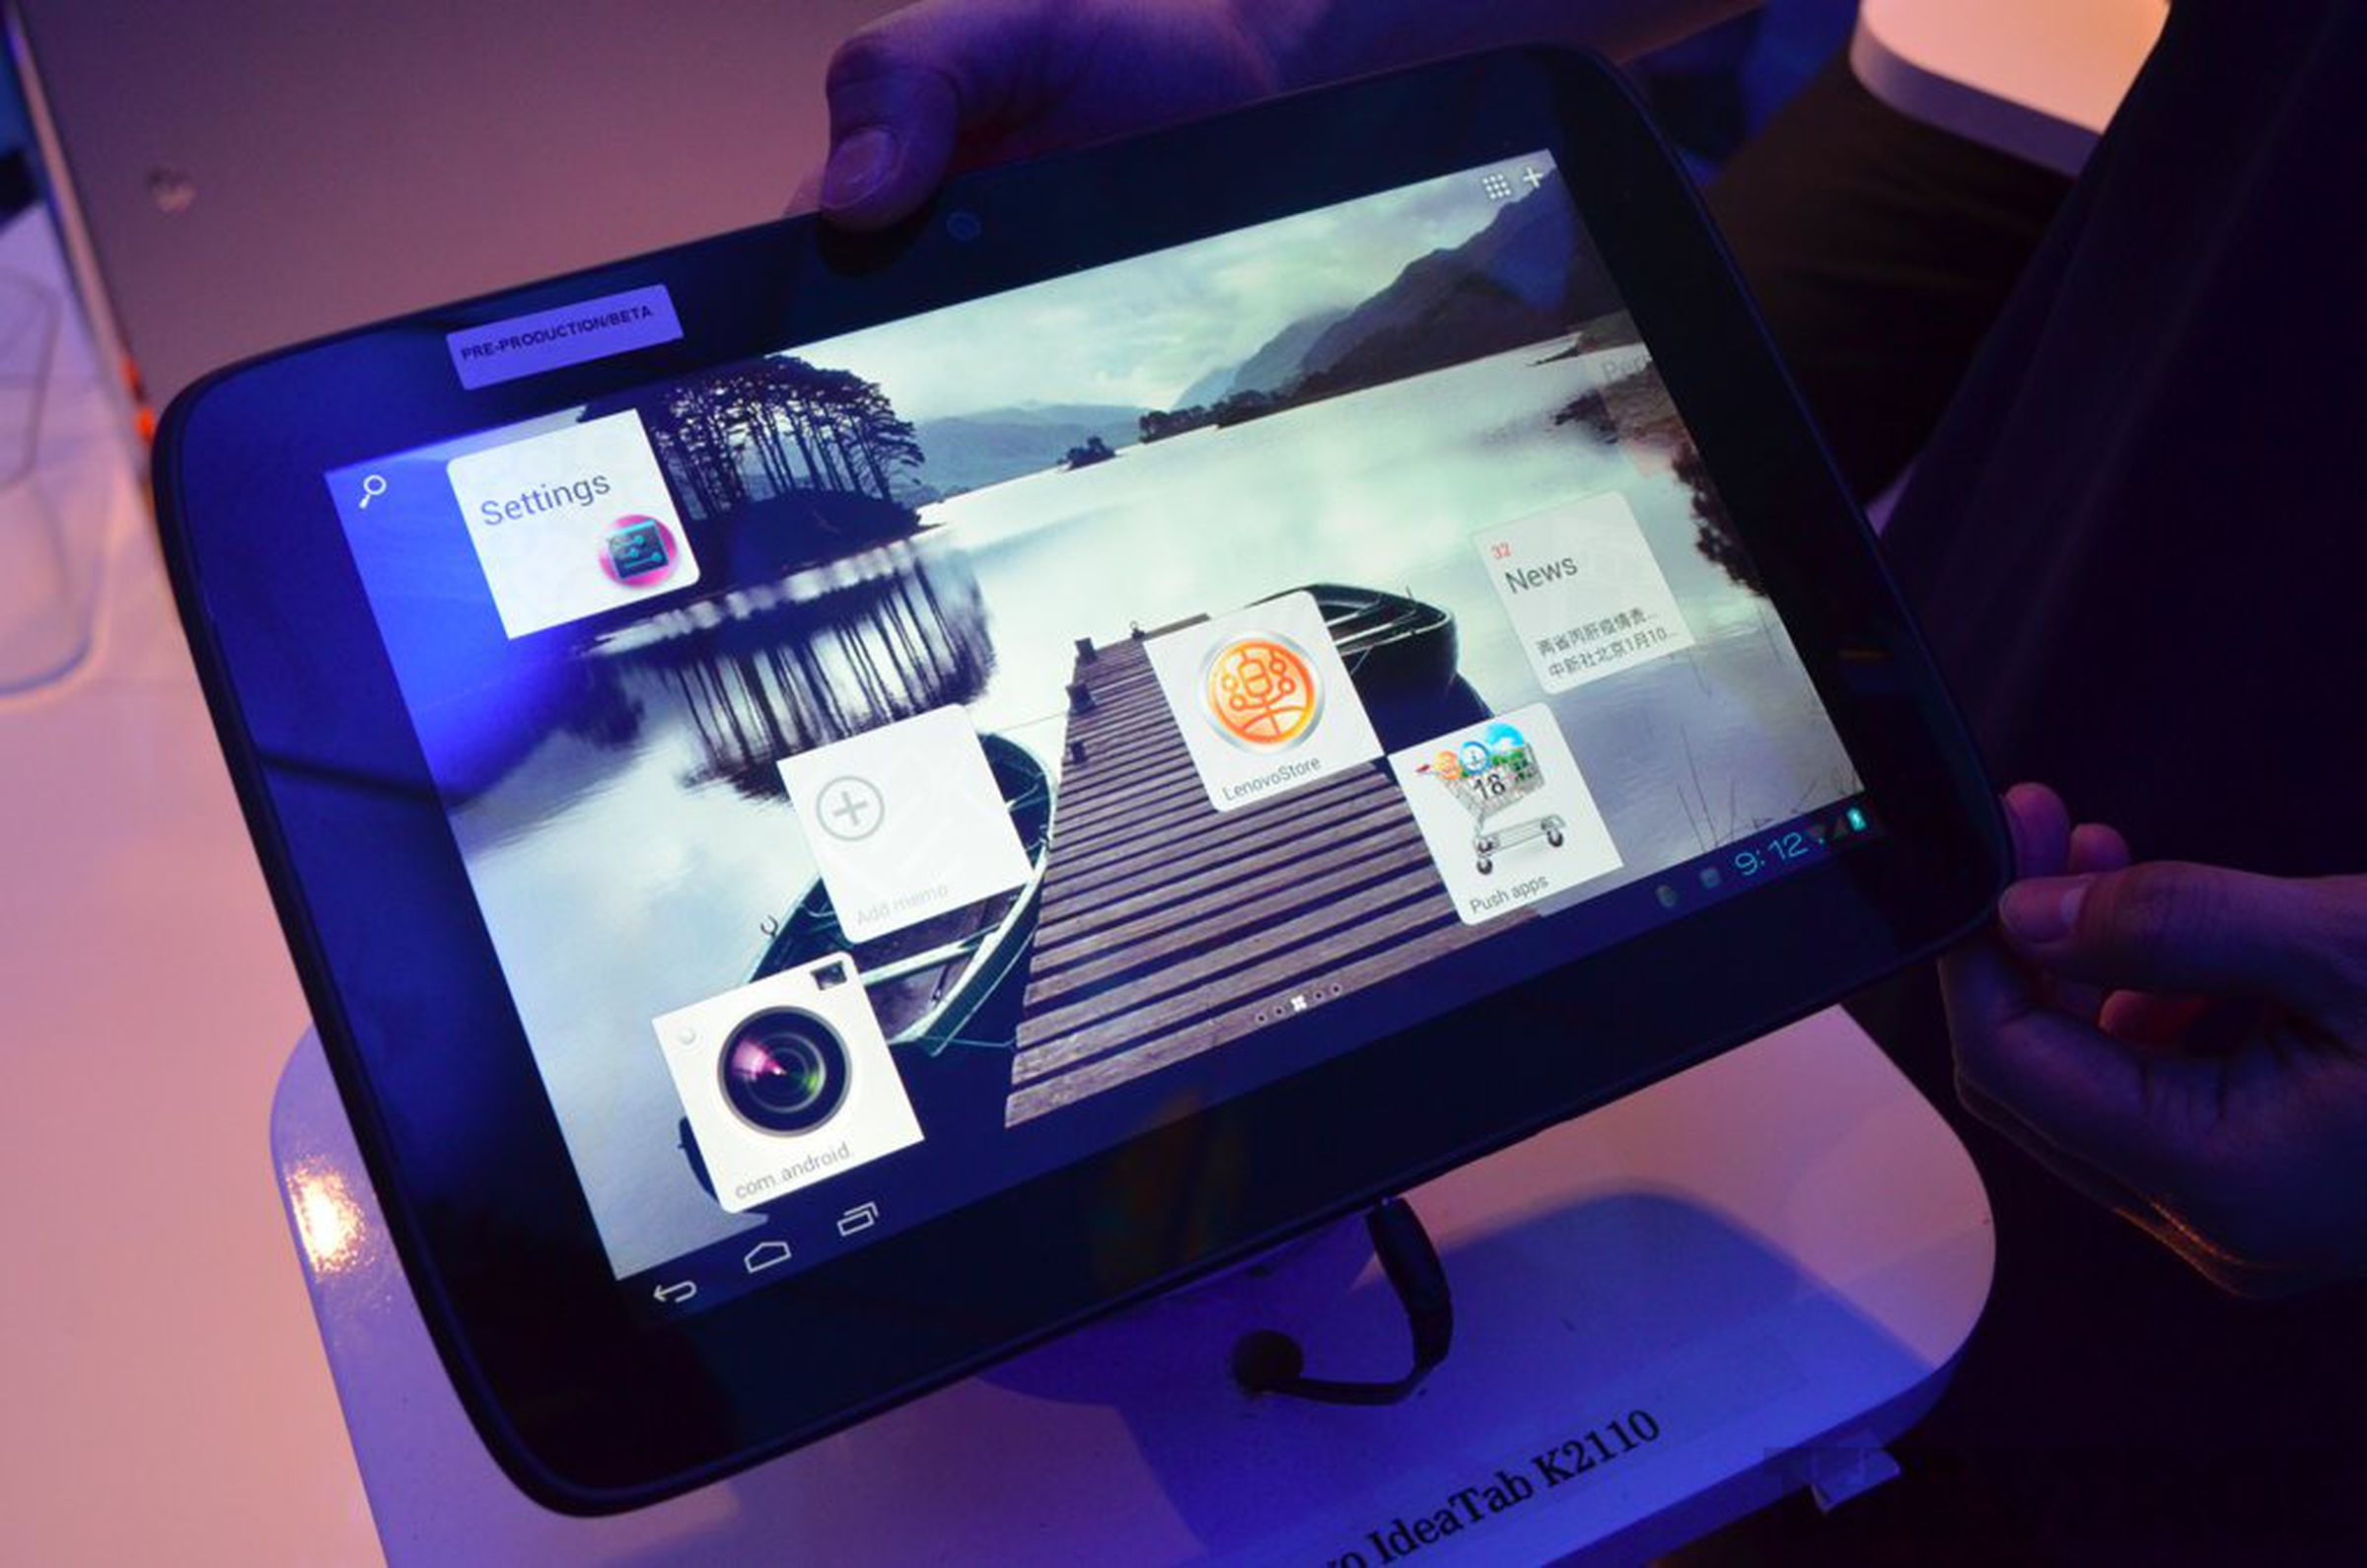 Lenovo IdeaTab K2110 Medfield tablet hands-on pictures